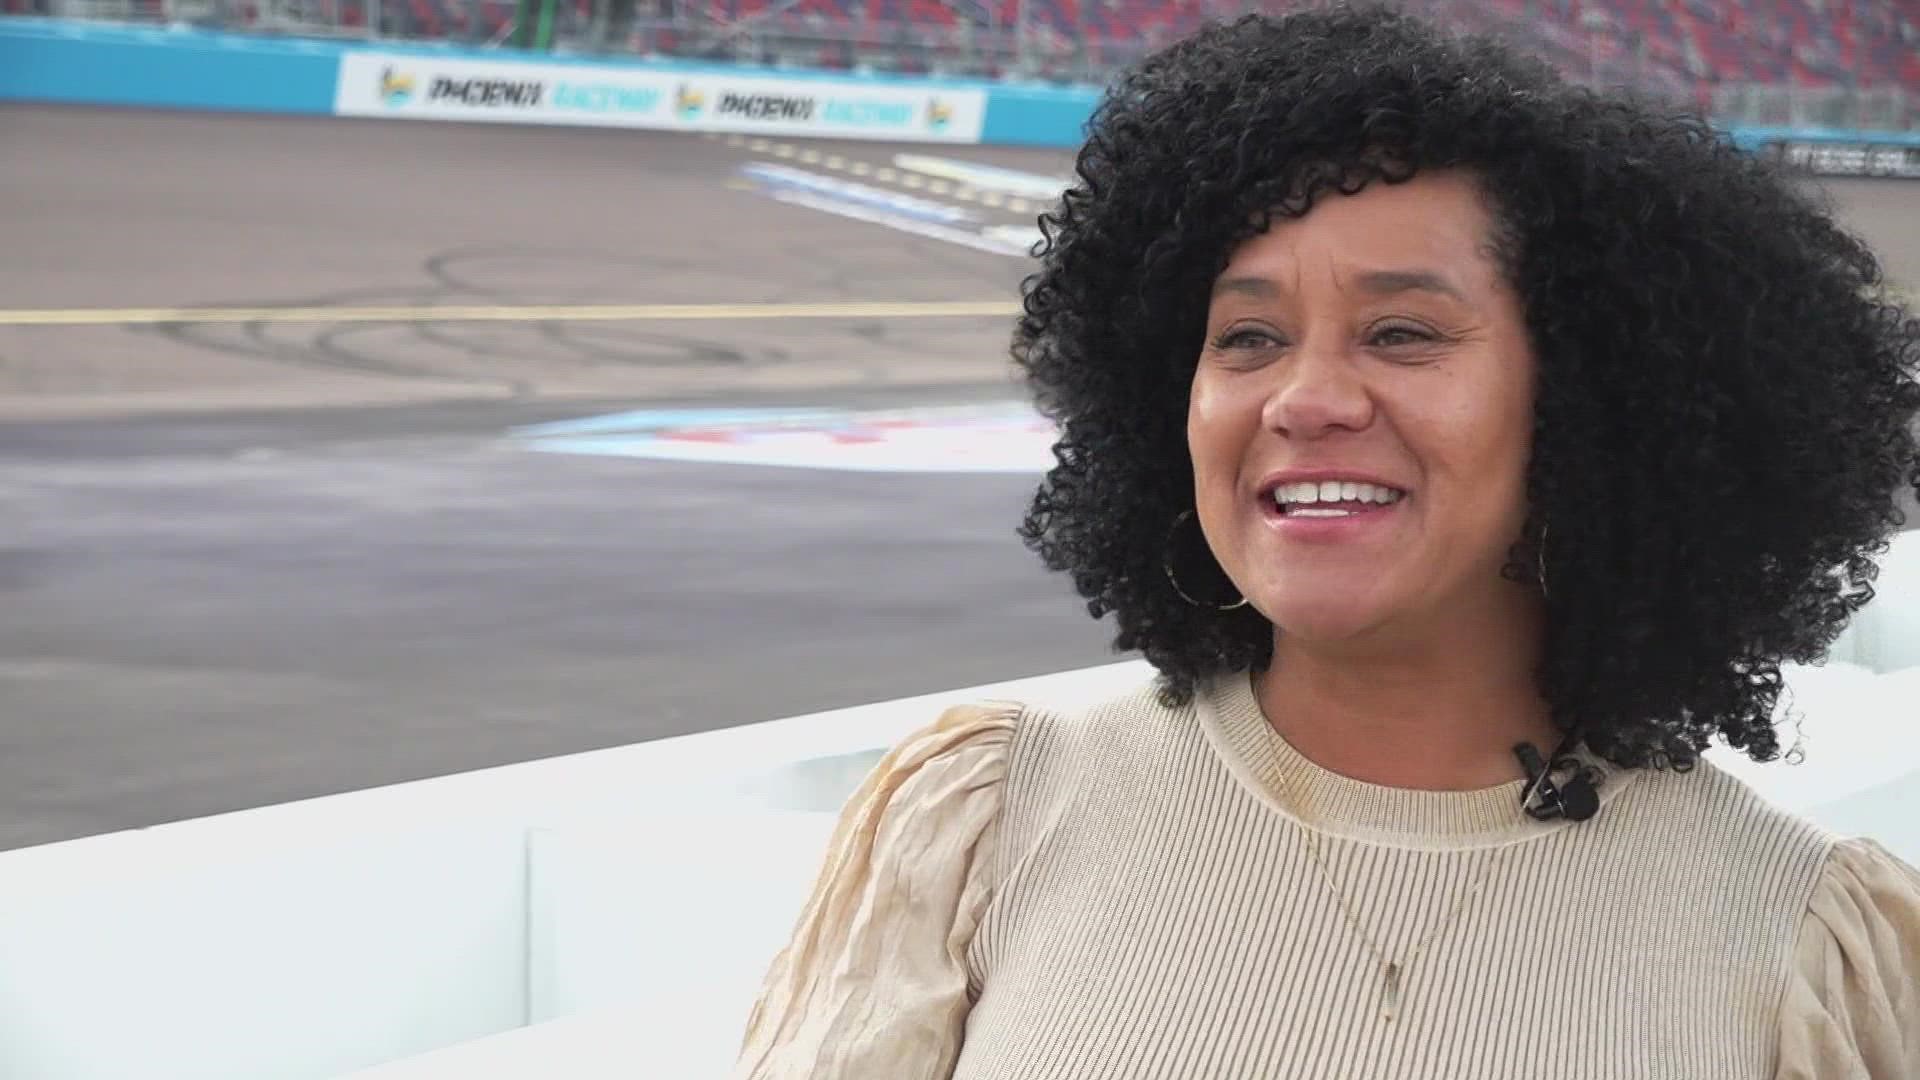 Latasha Causey is the first African-American female track president in NASCAR history.